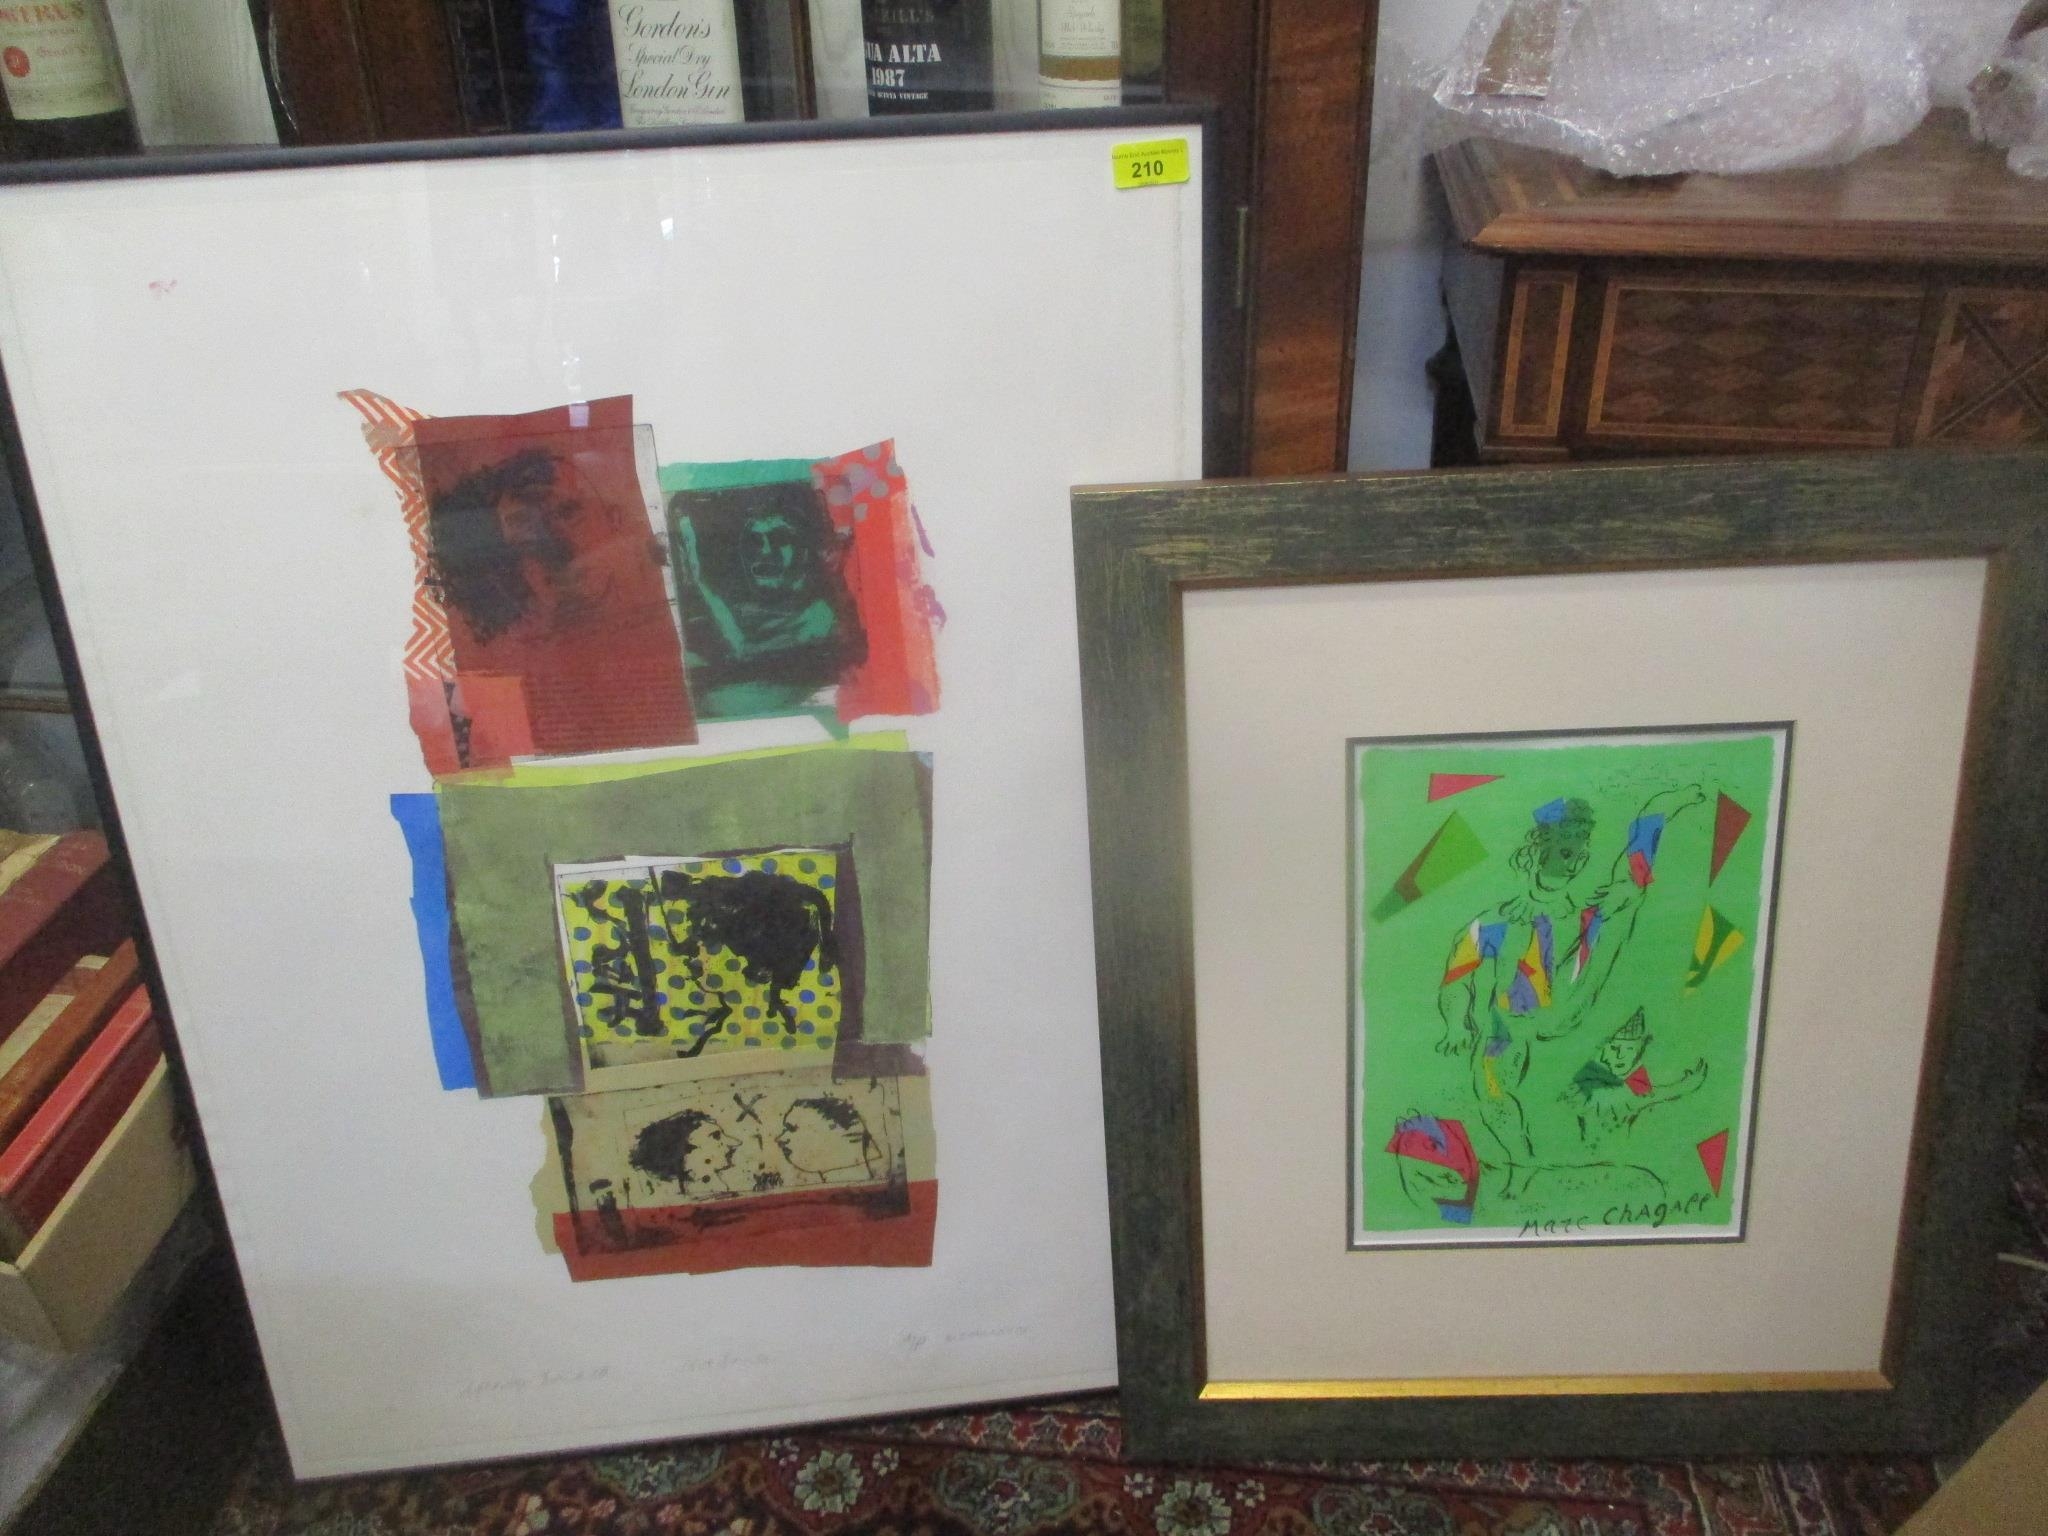 George Donald - 'Love Song' artist proof prints and after Marc Chagall print, framed and glazed